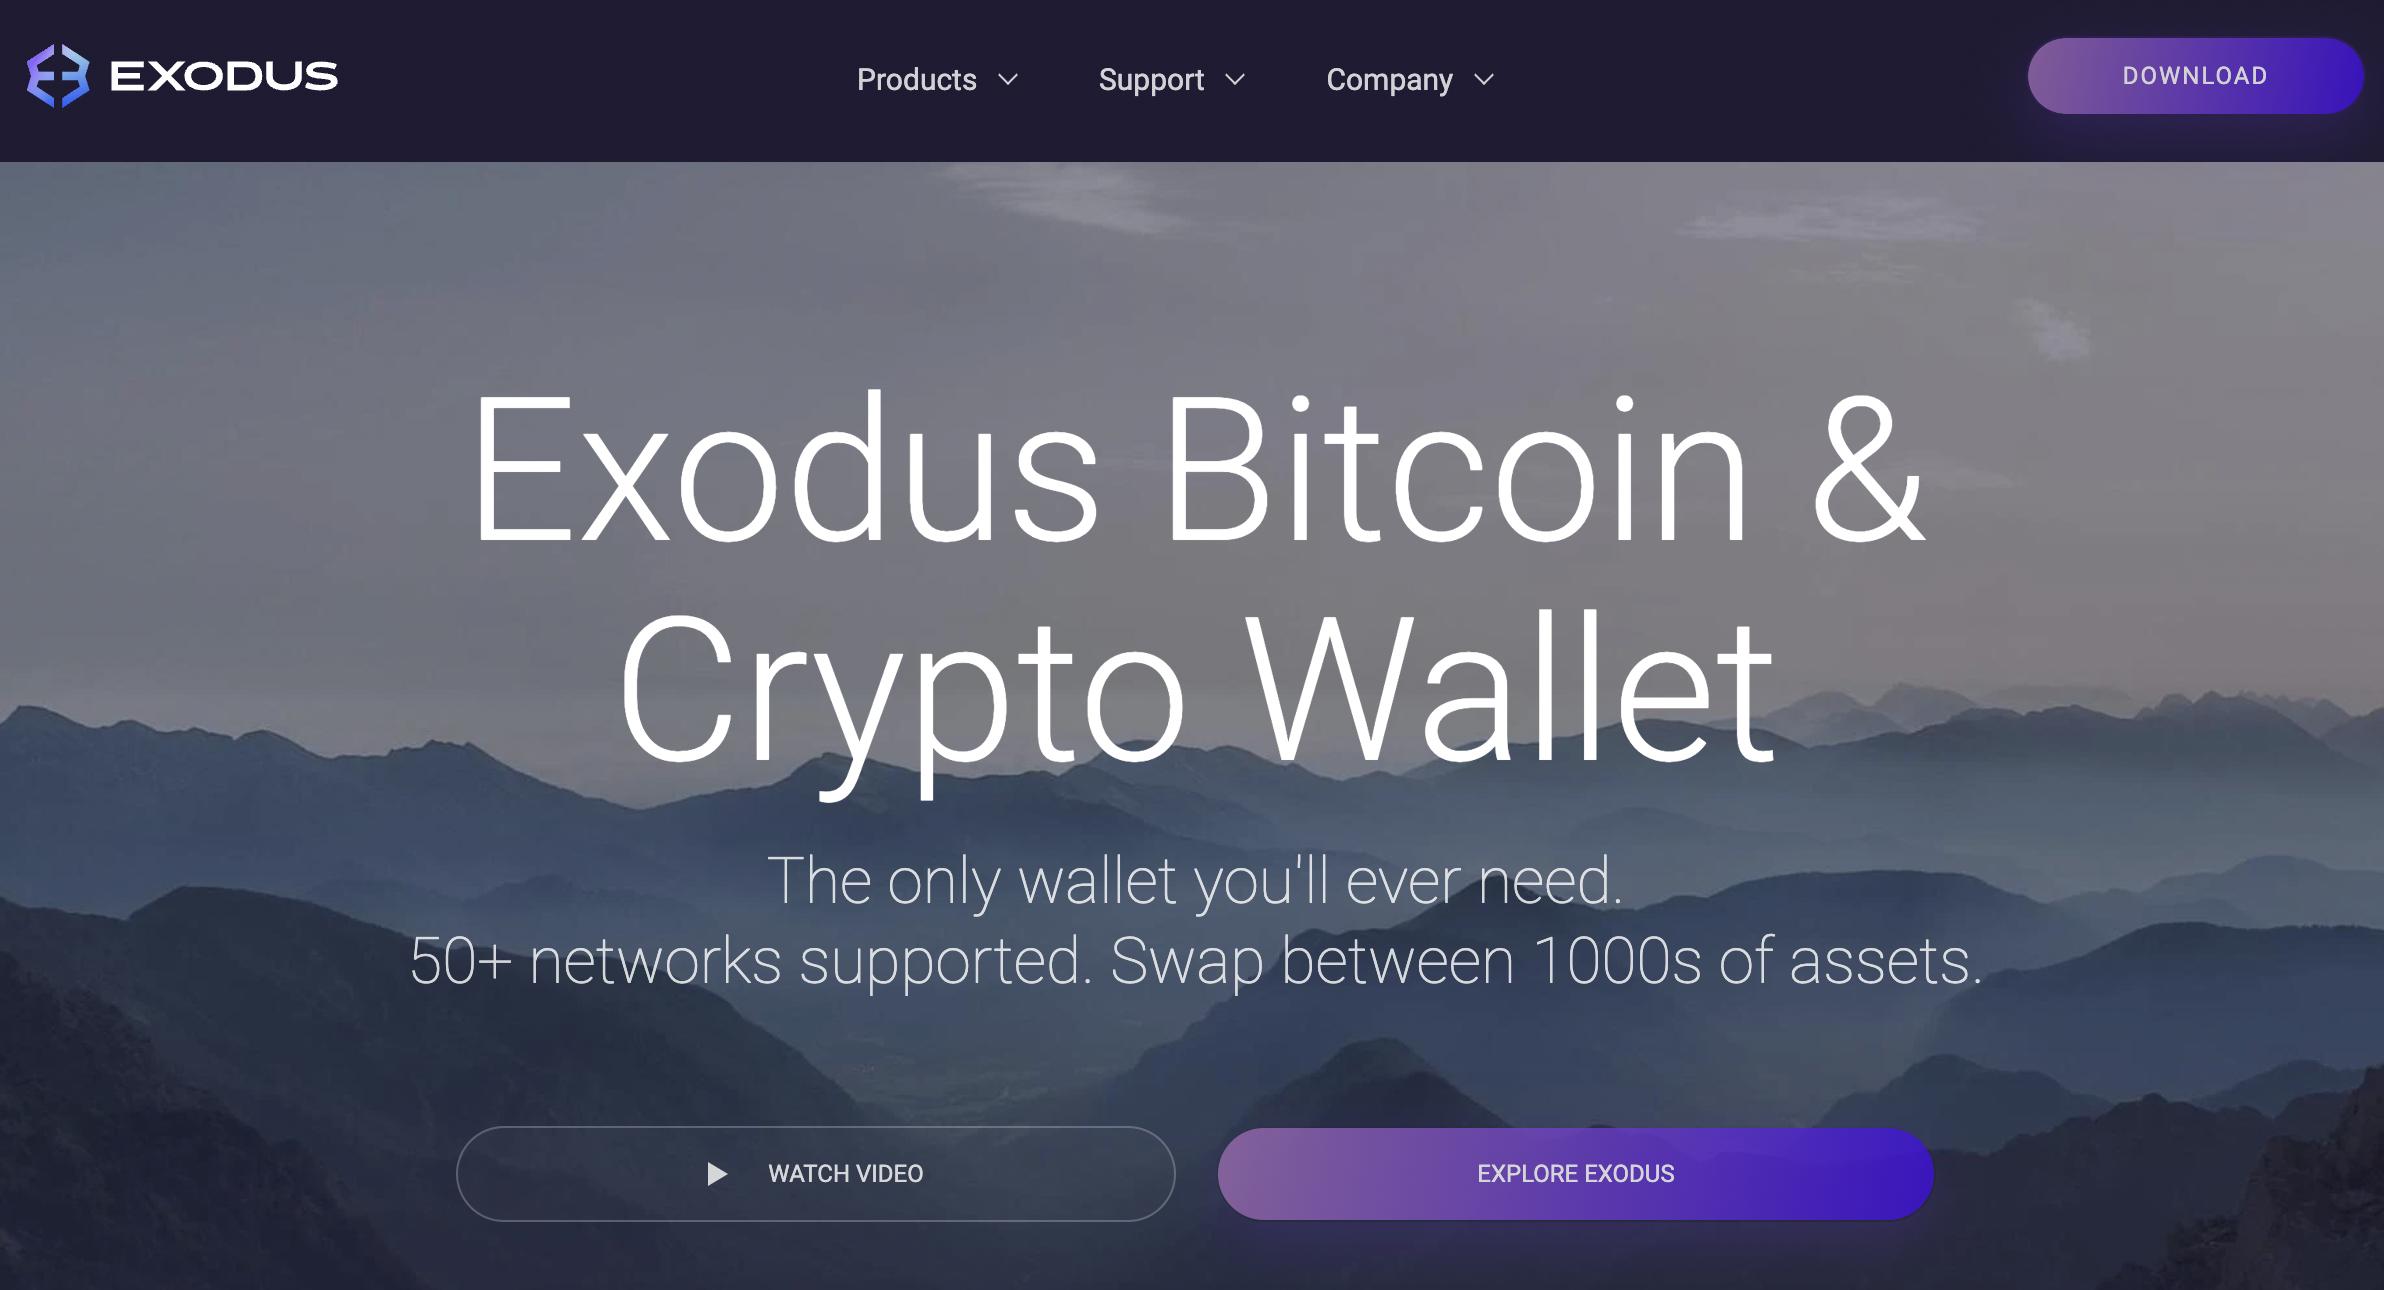 Exodus Wallet Download Page